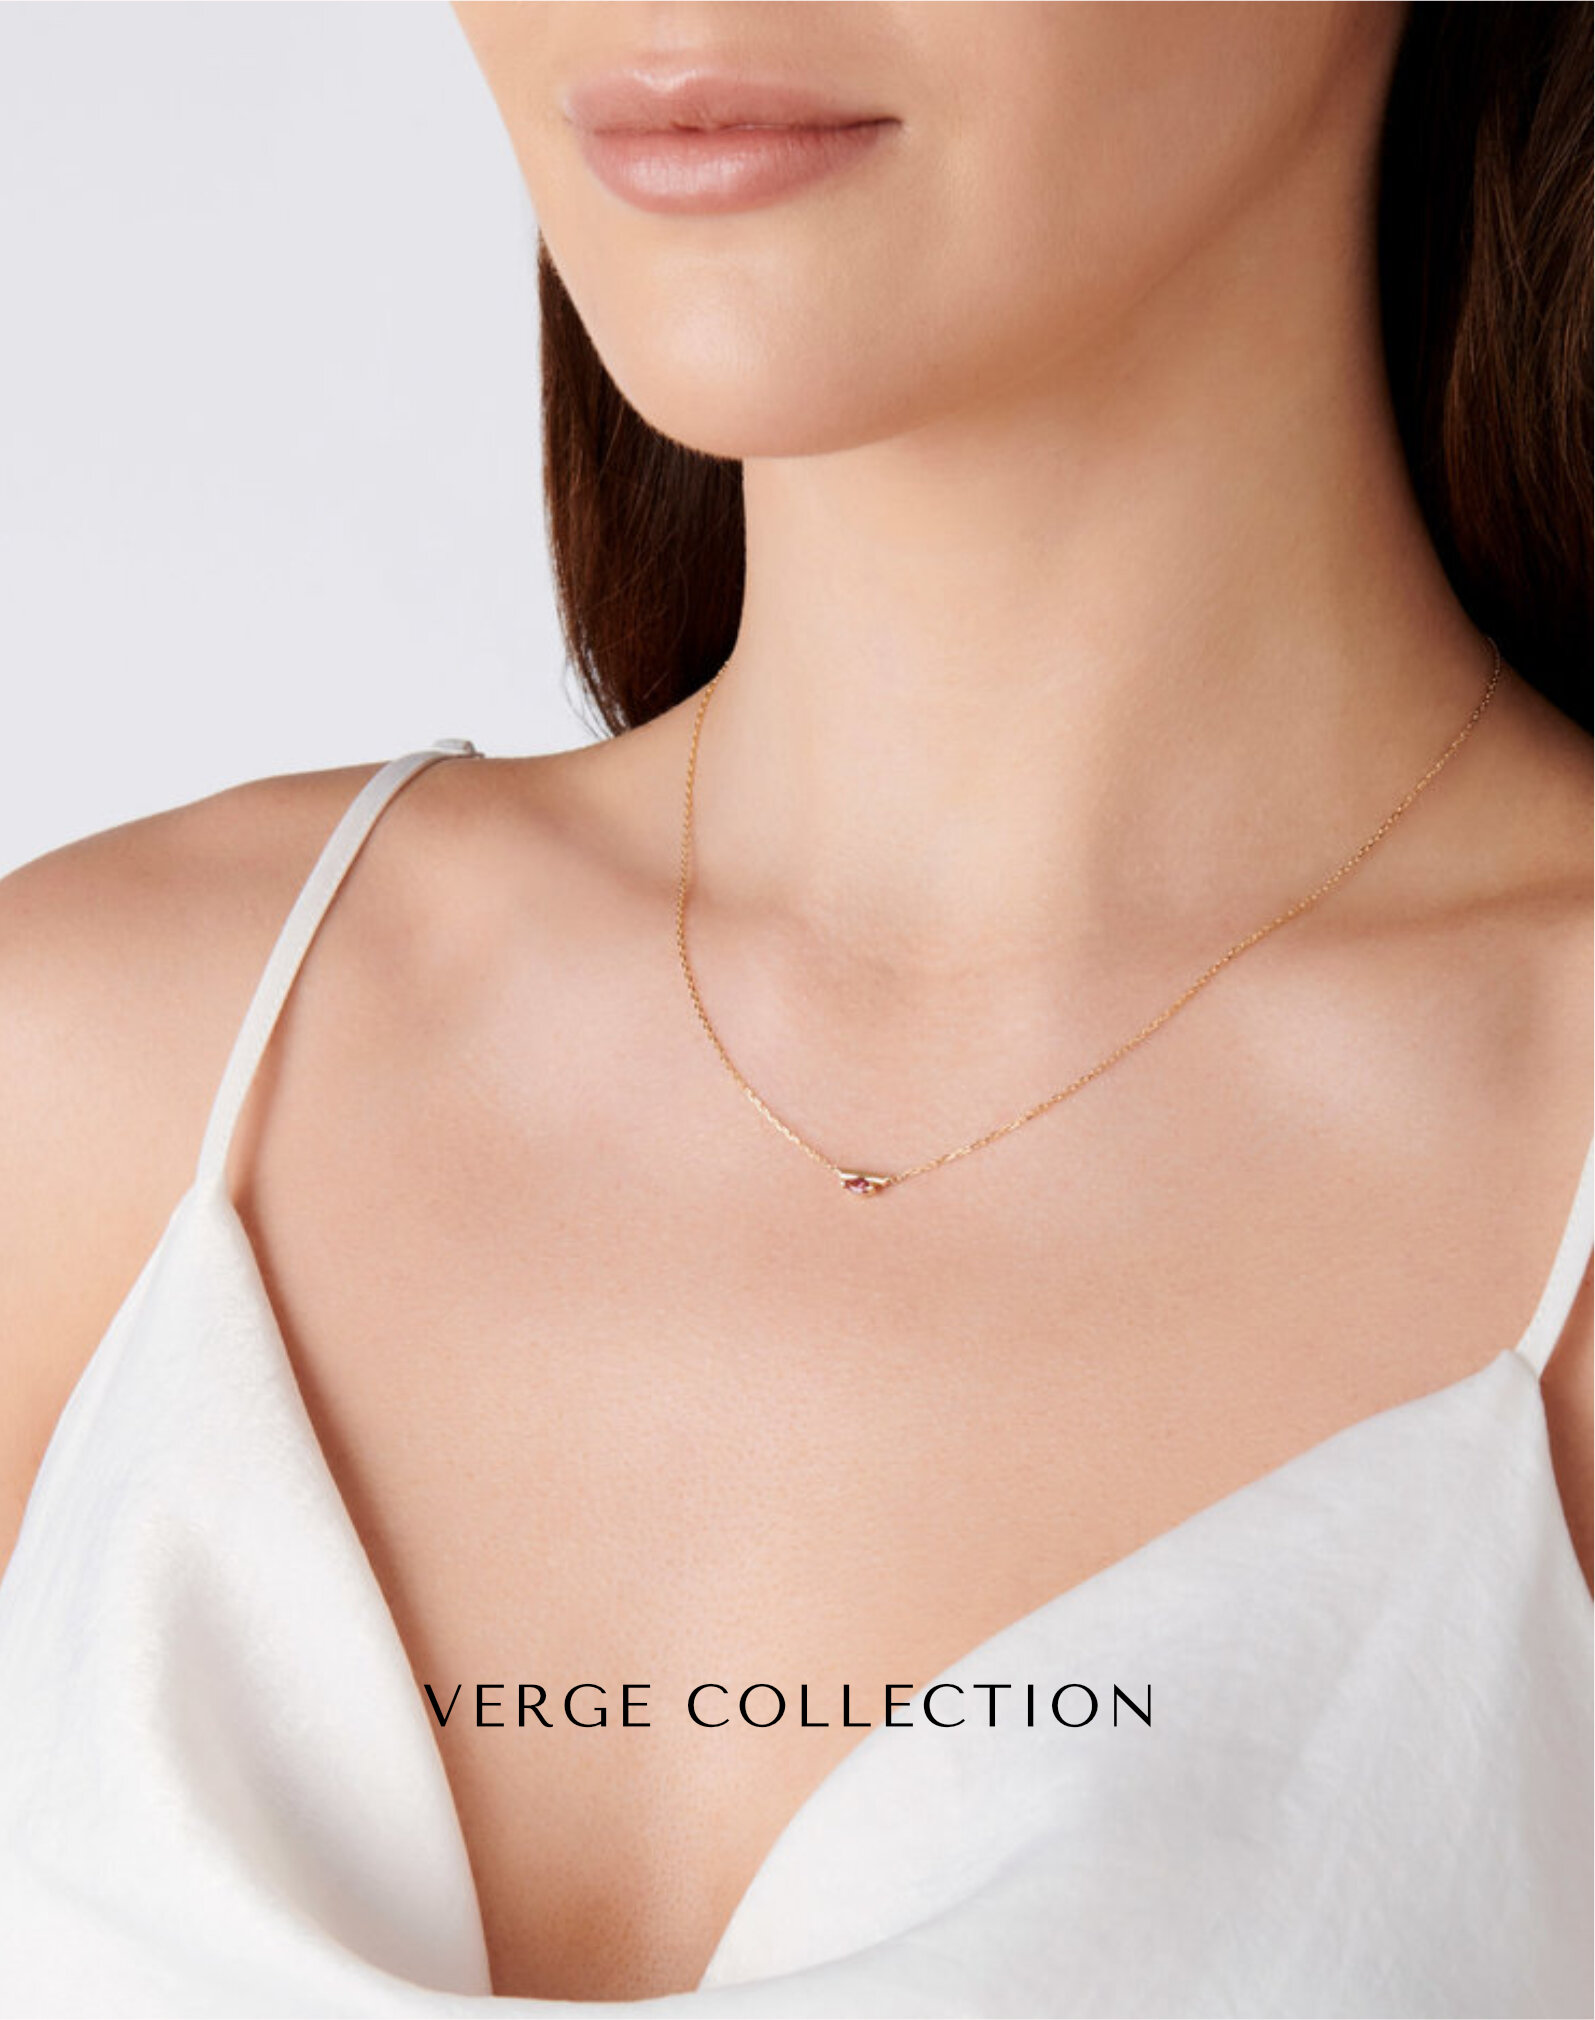 VERGE COLLECTION